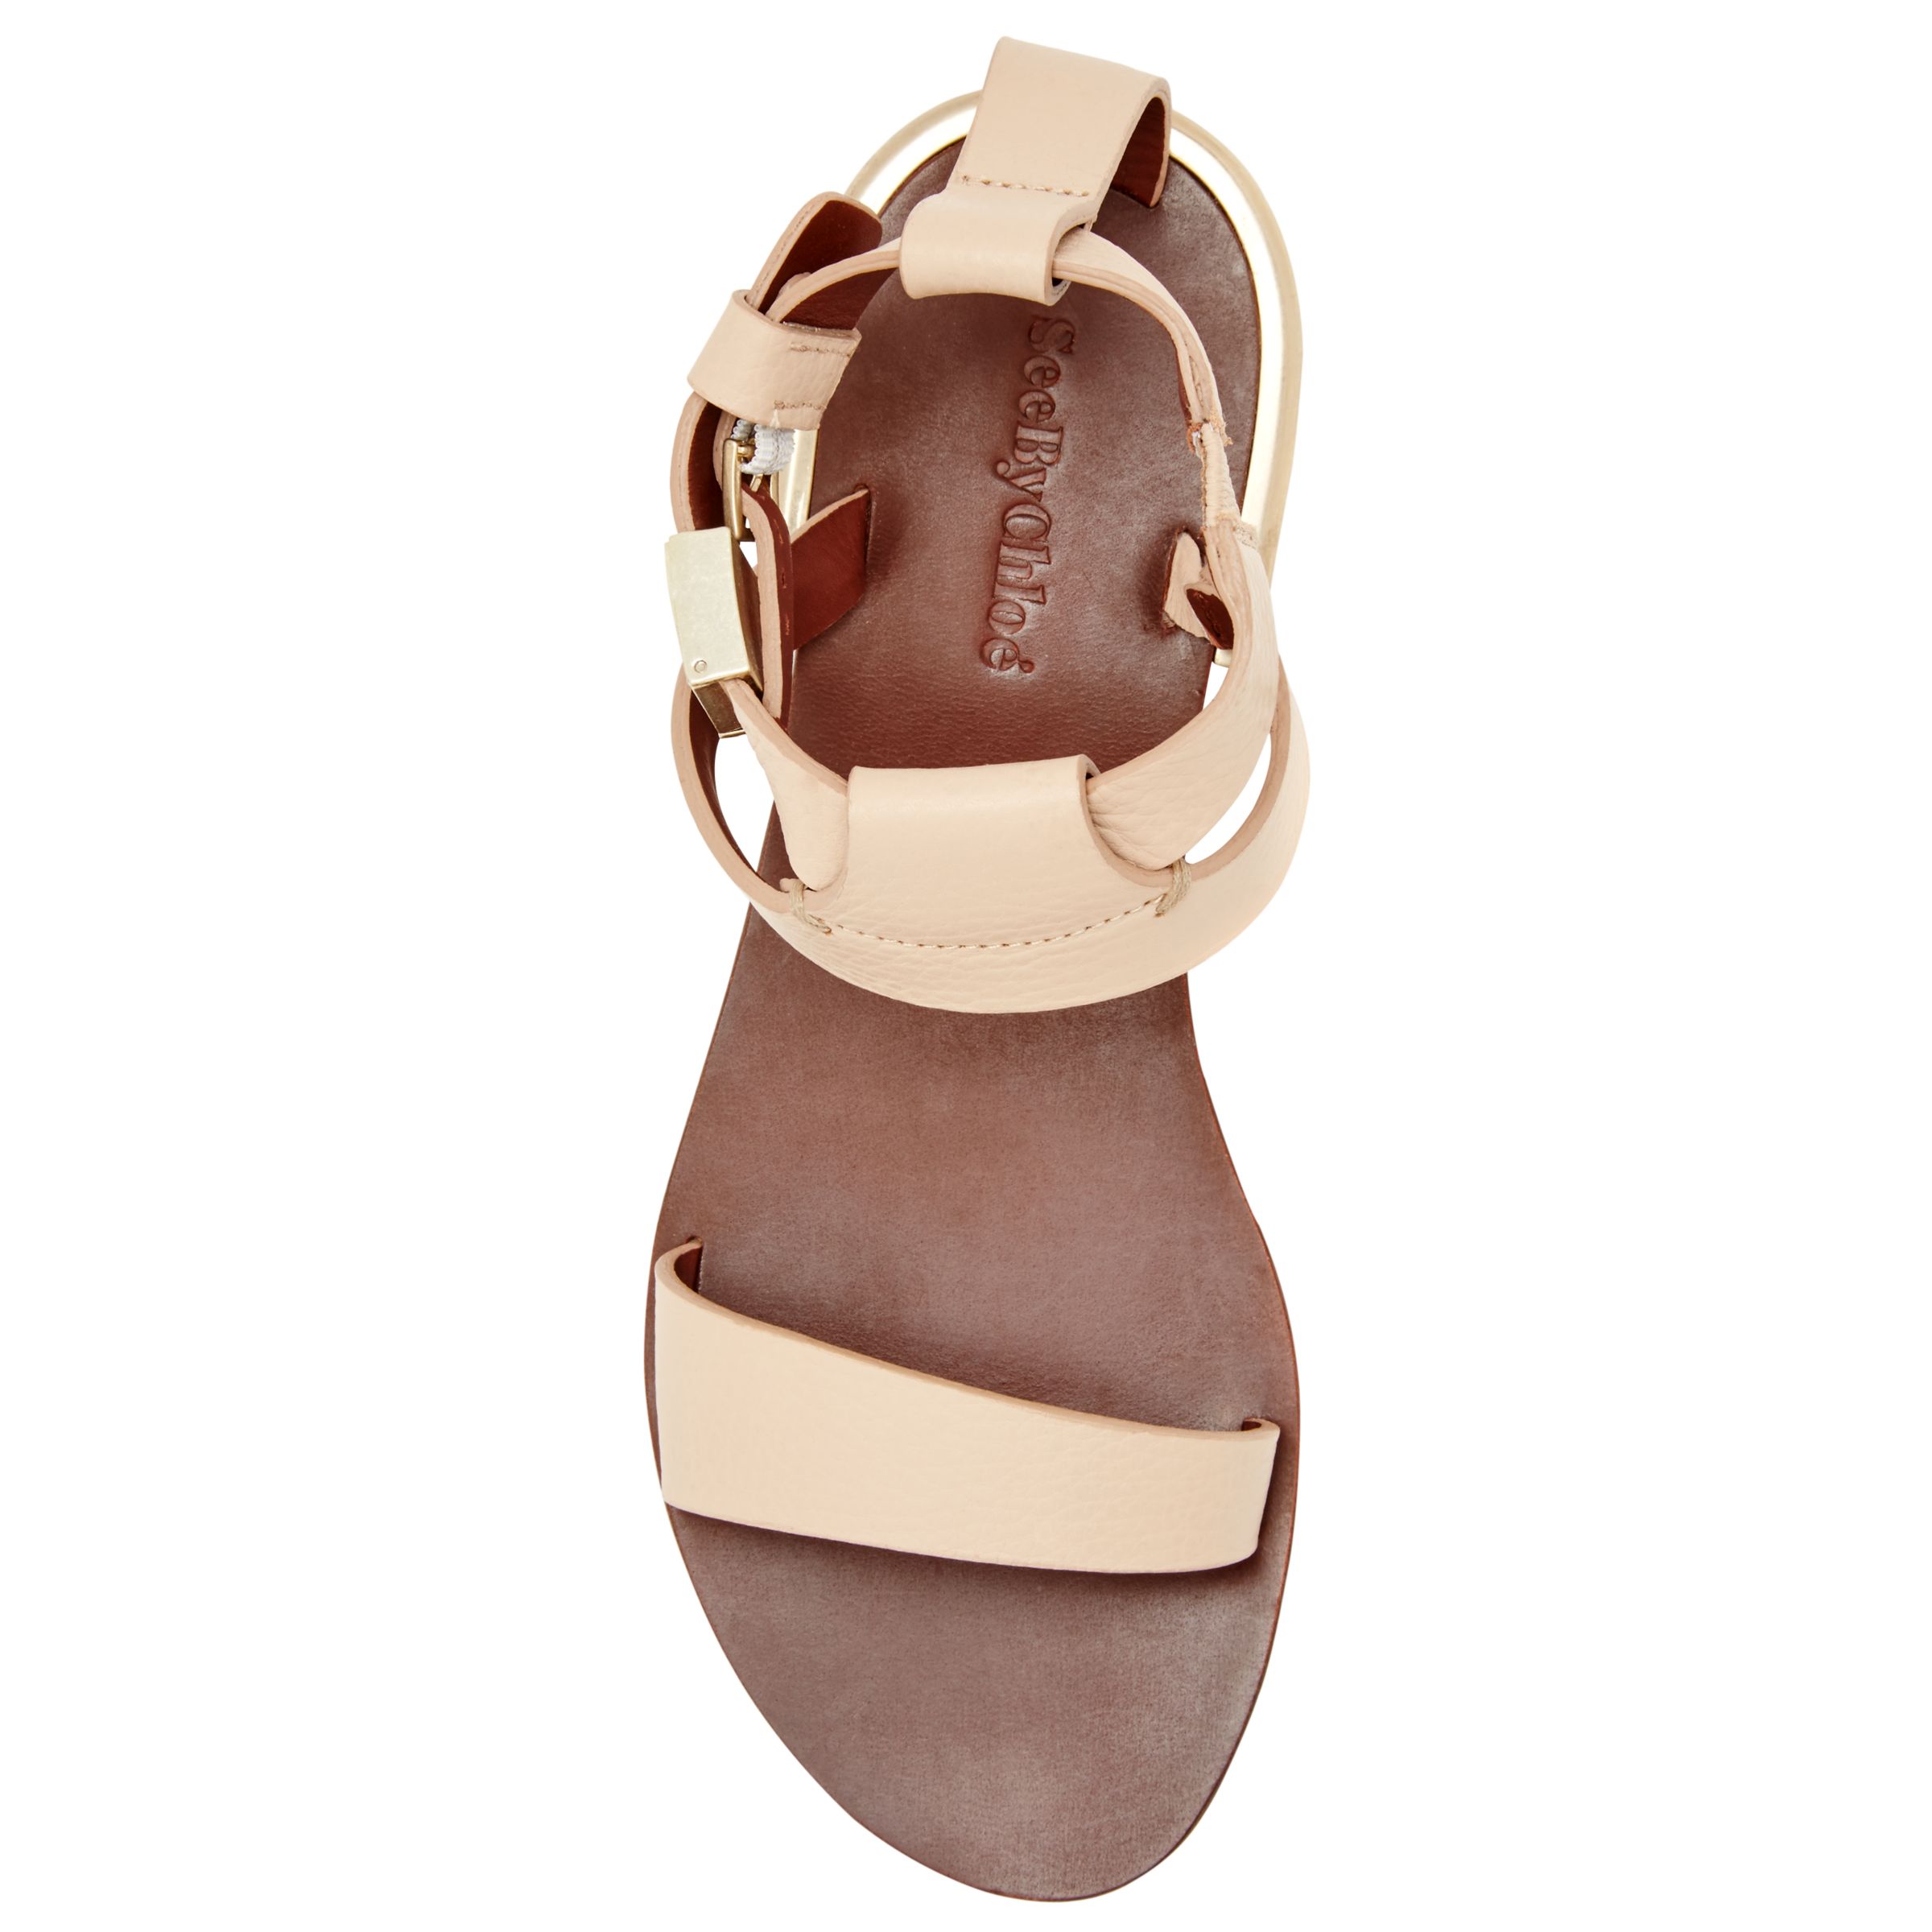 See by Chloé Flat Ankle Strap Sandals